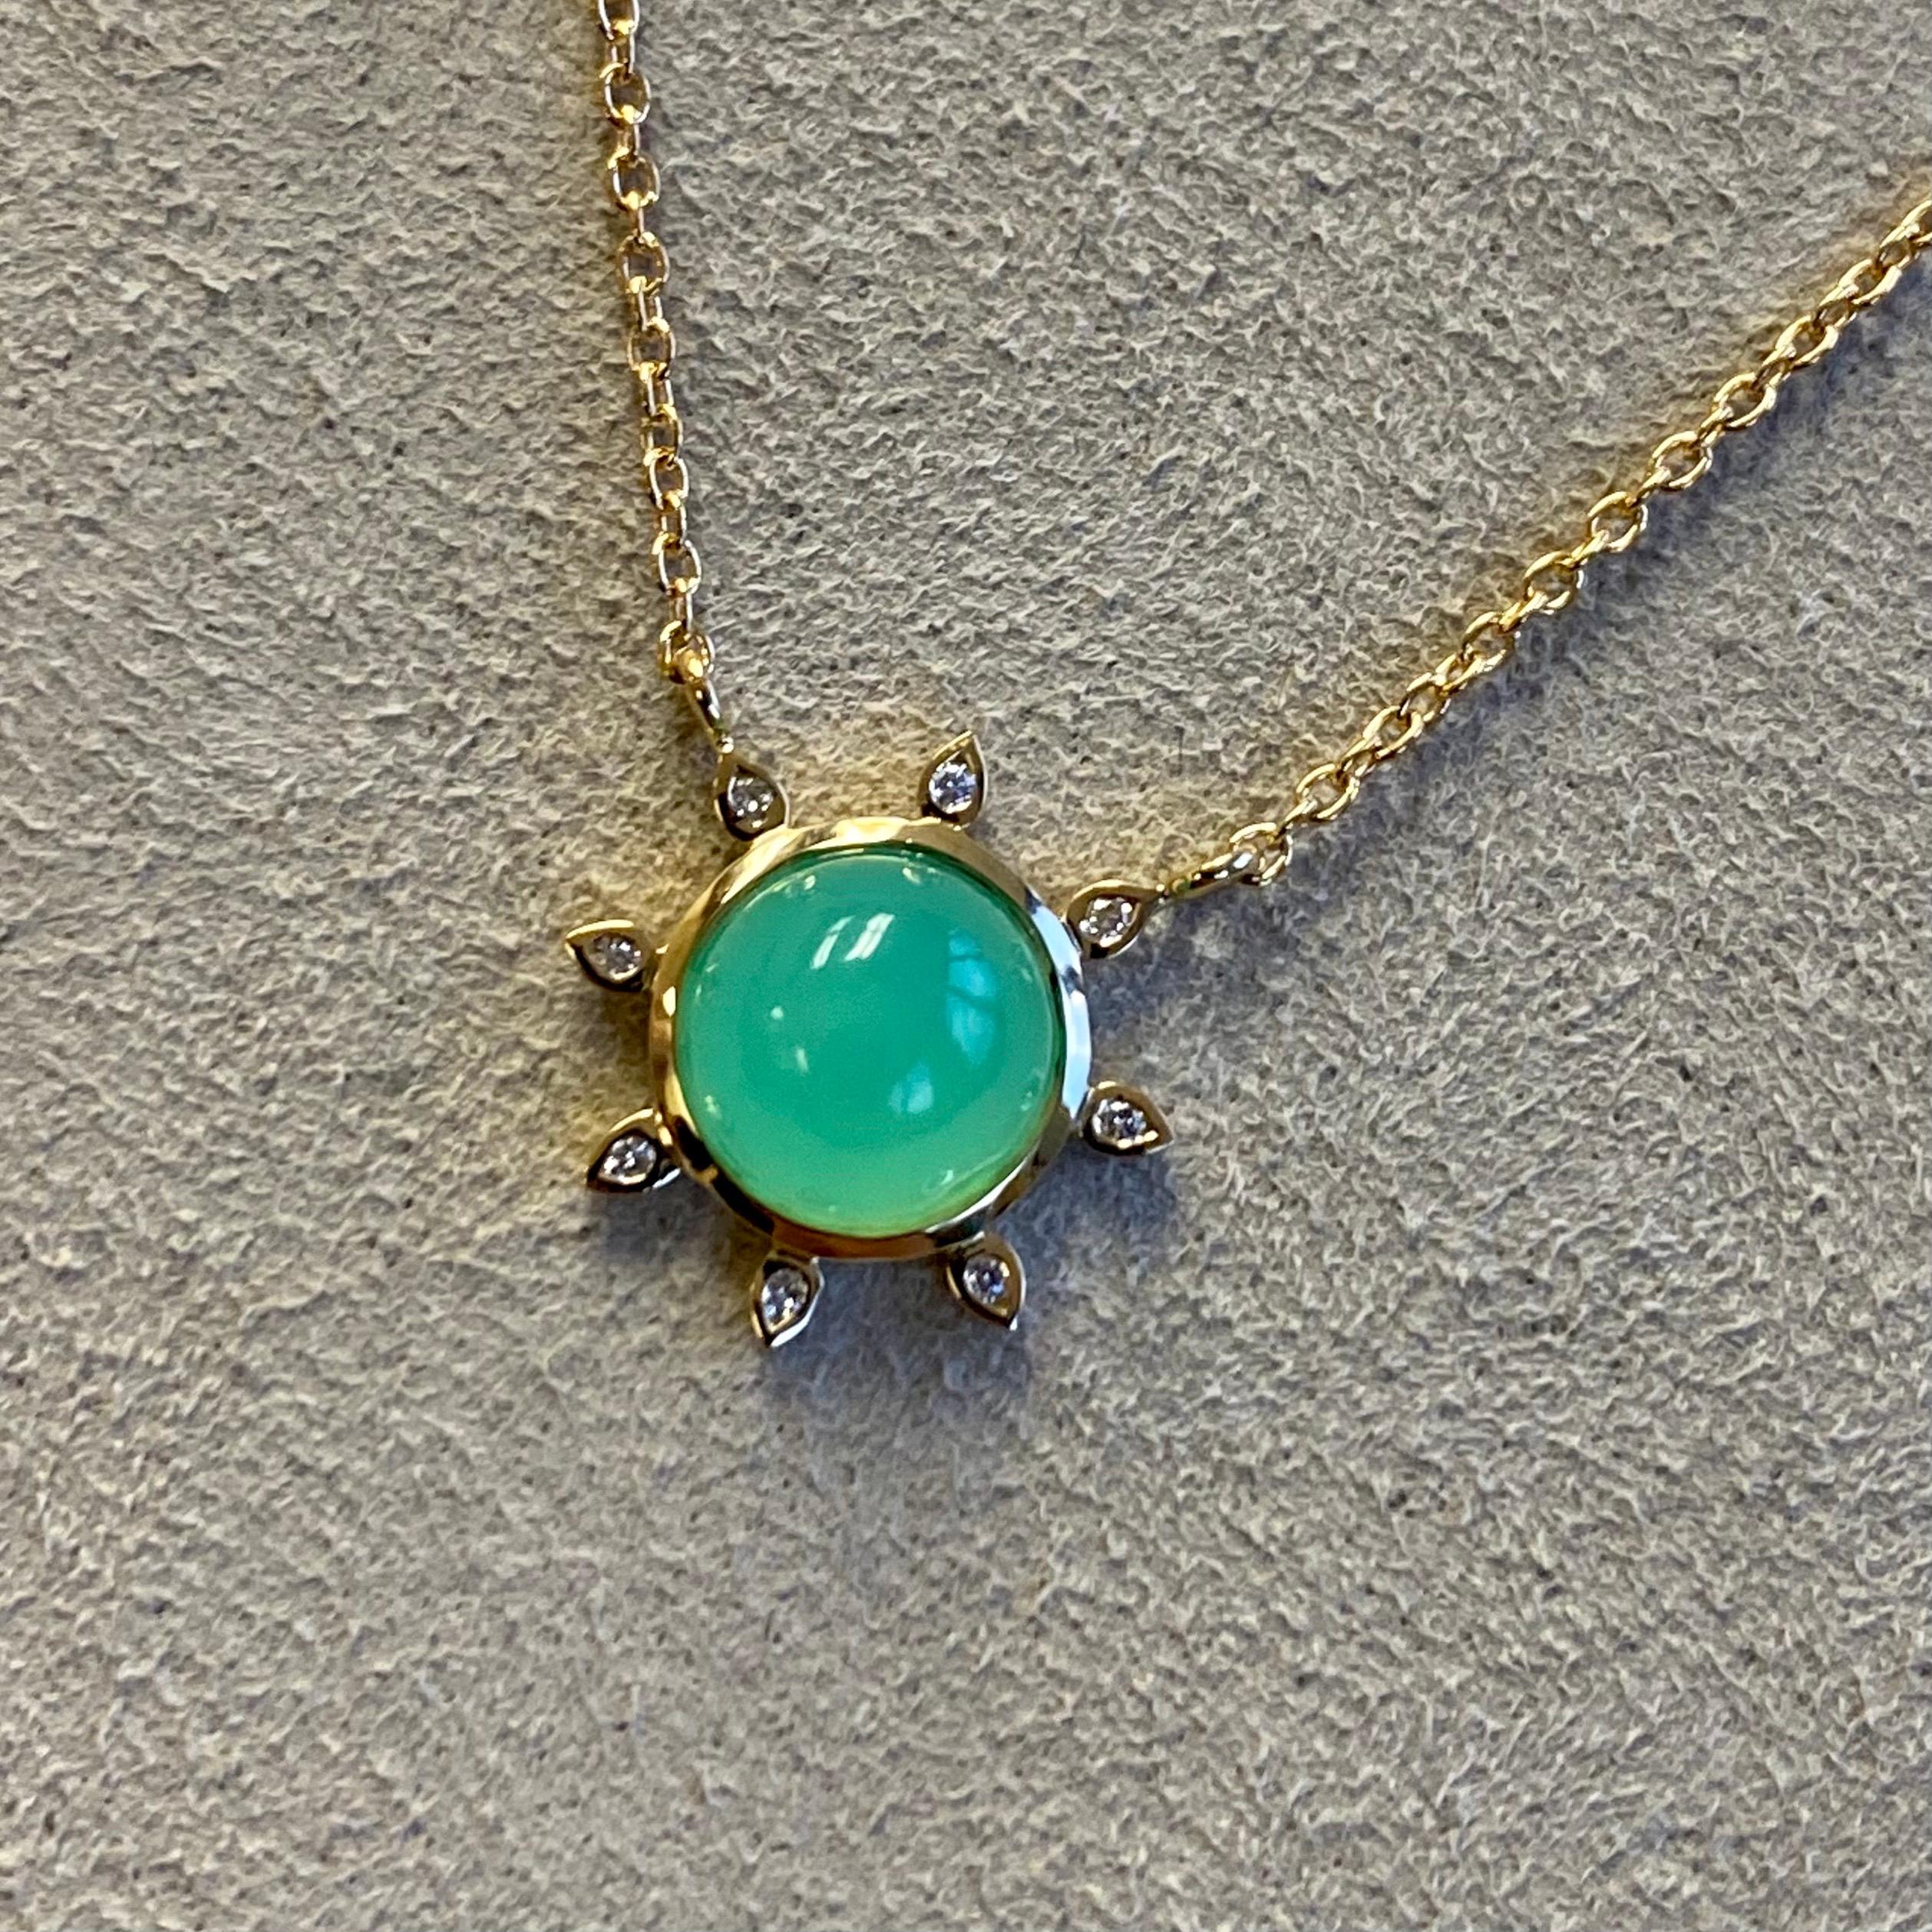 Created in 18 karat yellow gold
Chrysoprase 2 carats approx.
Diamonds 0.04 carat approx.
18 inch length, adjustable at 16-17
Limited edition

Constructed from 18 karat yellow gold, this limited edition necklace features a Chrysoprase gemstone